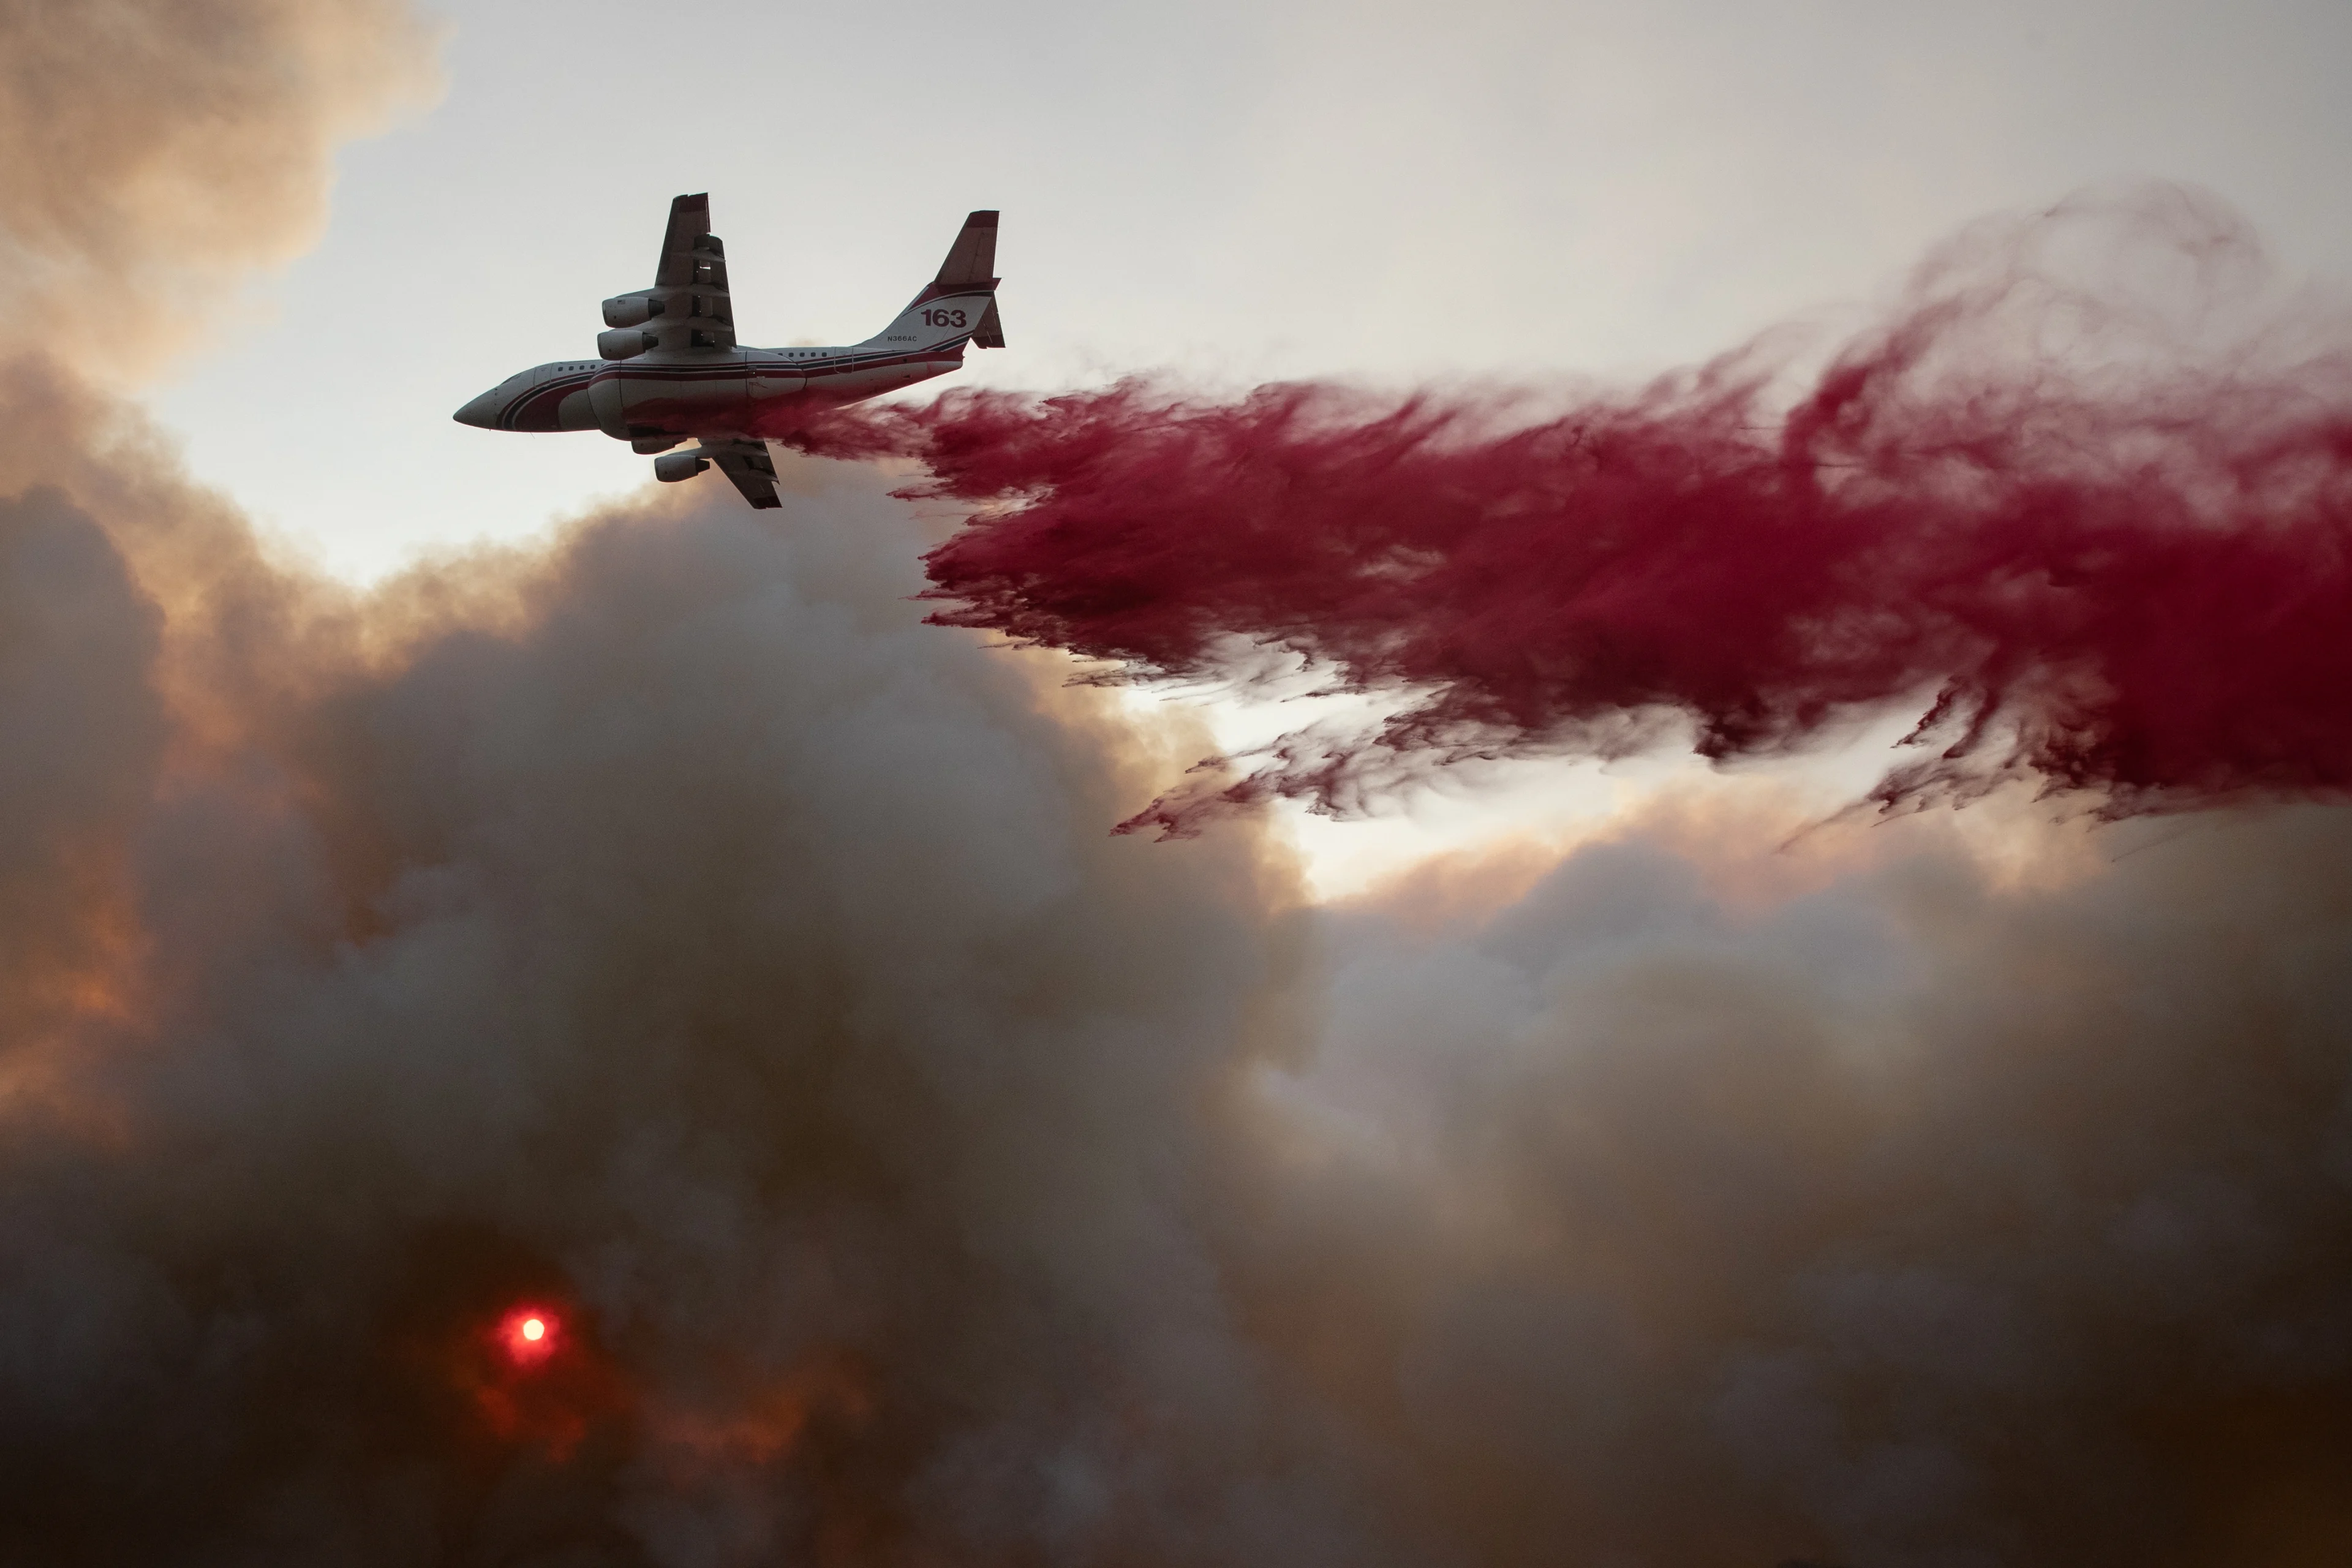 Reuters wildfire water bomber